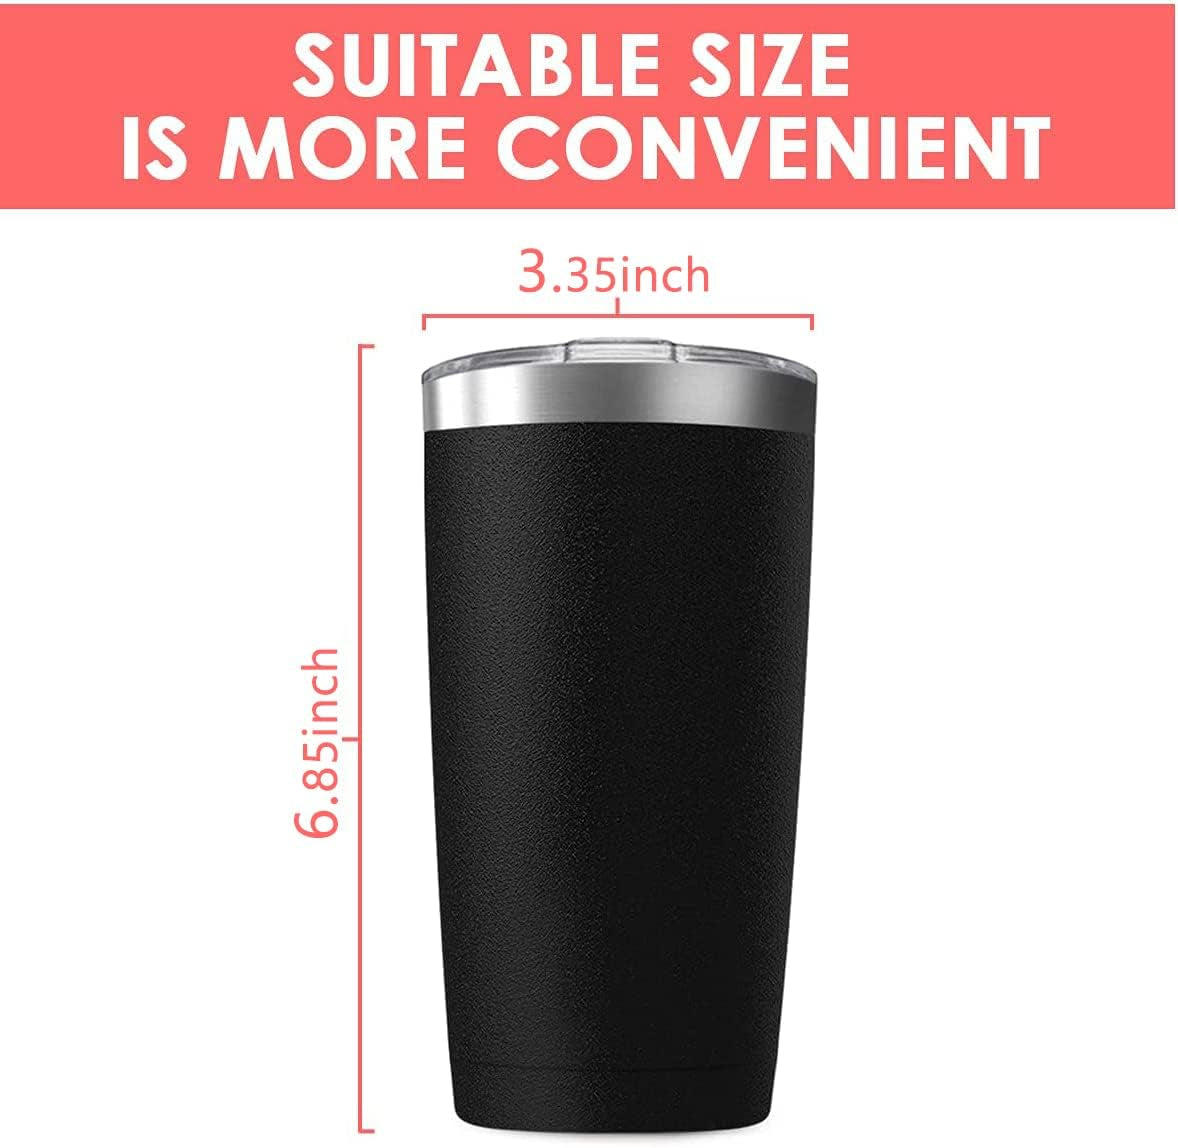 20Oz Tumbler Vacuum Insulated Travel Mug with Lids, Stainless Steel Double Wall Thermal Coffe Cup for Home, Office, Outdoor Suitable for Vehicle Cup Holders